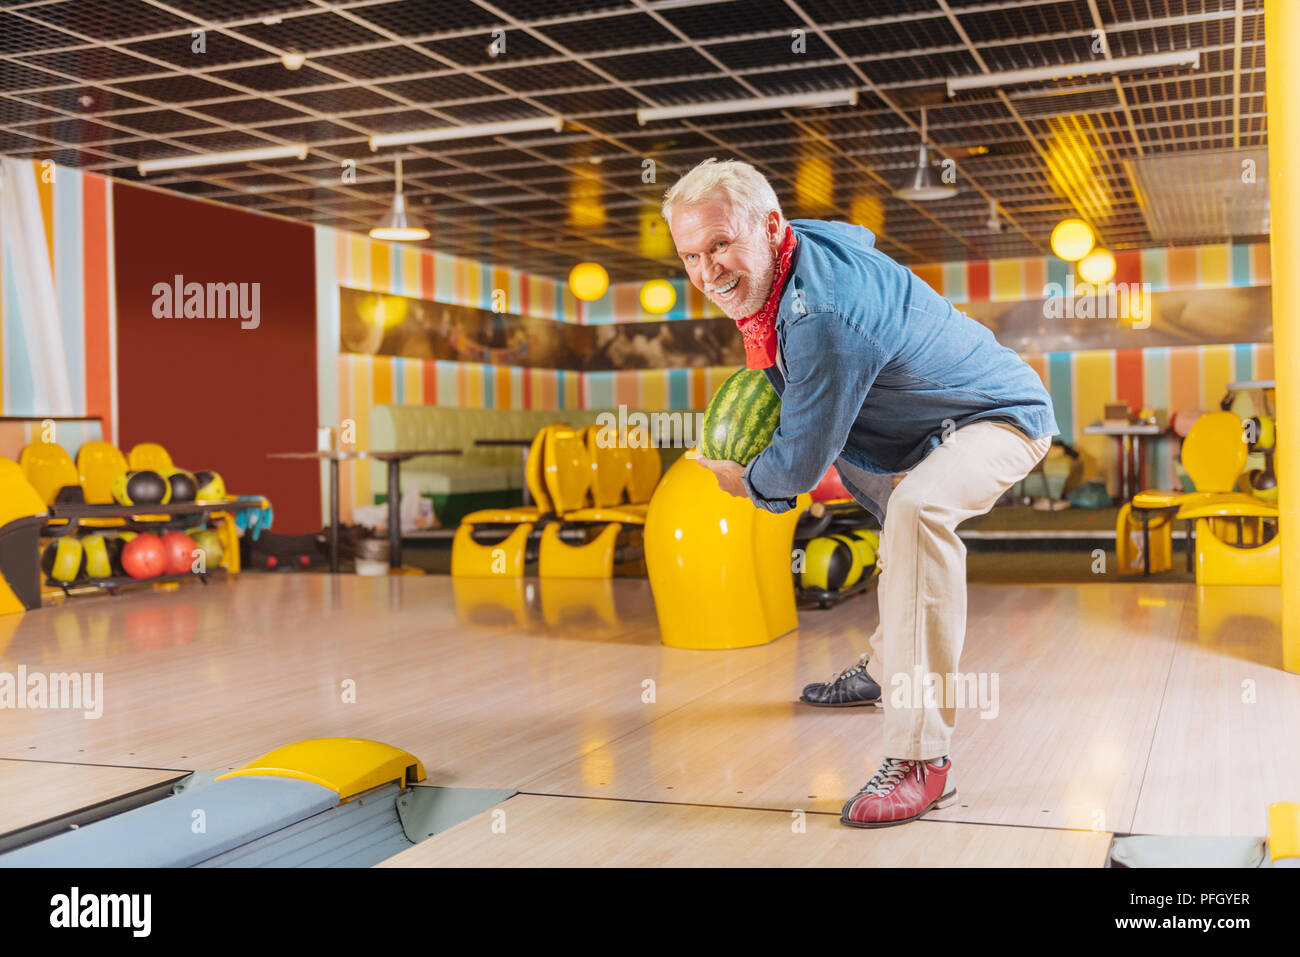 Cheerful aged man playing bowling with a watermelon Stock Photo